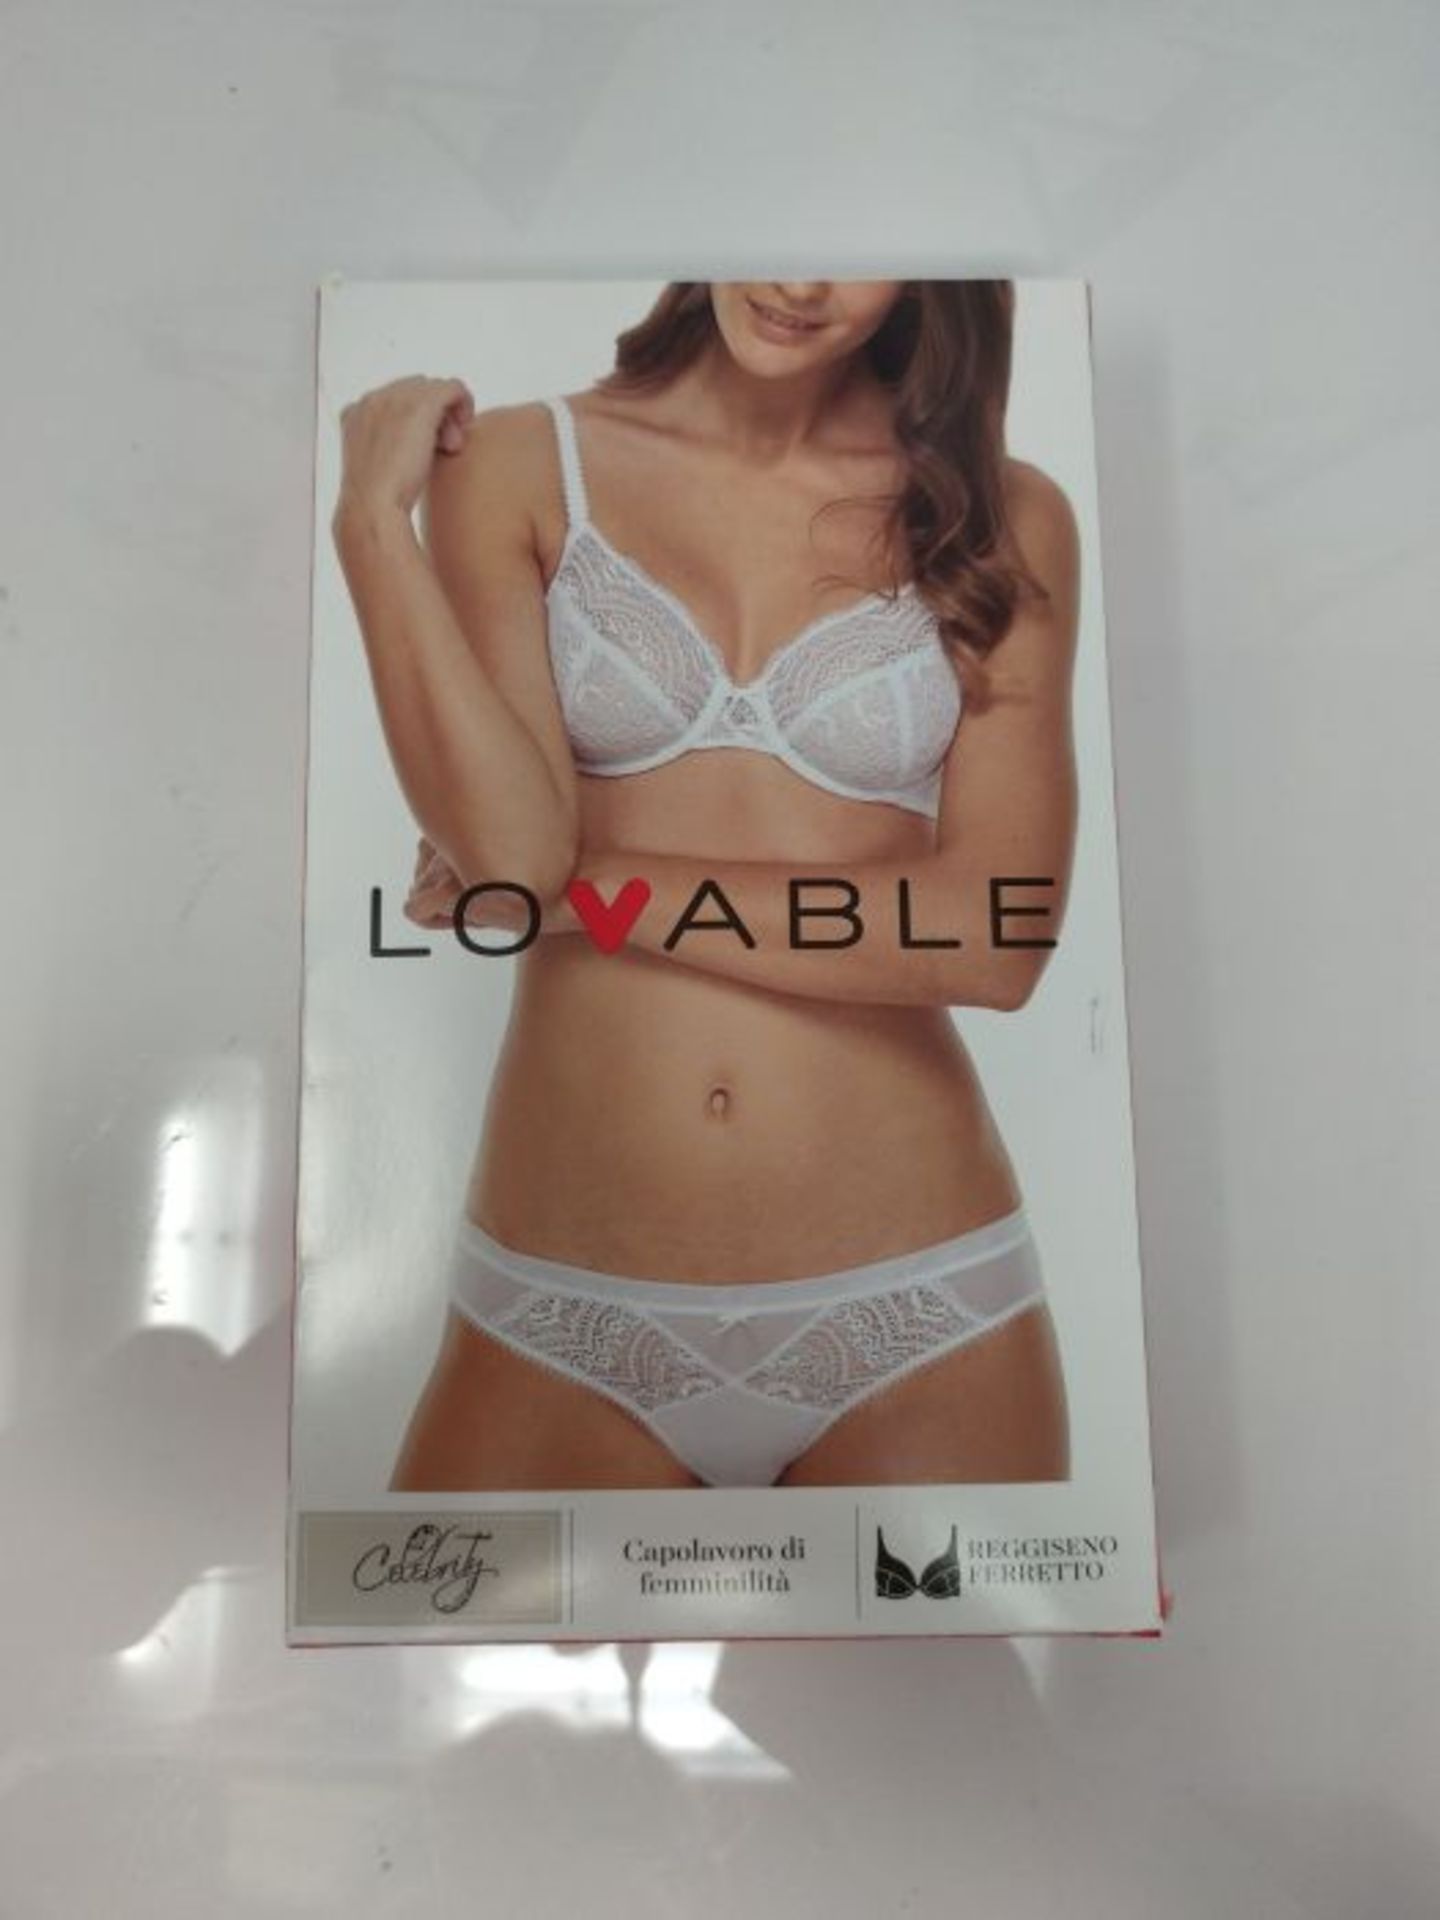 Lovable Women's 9L04HV Underwire Bra Without Padding, Skins, 36E - Image 2 of 3